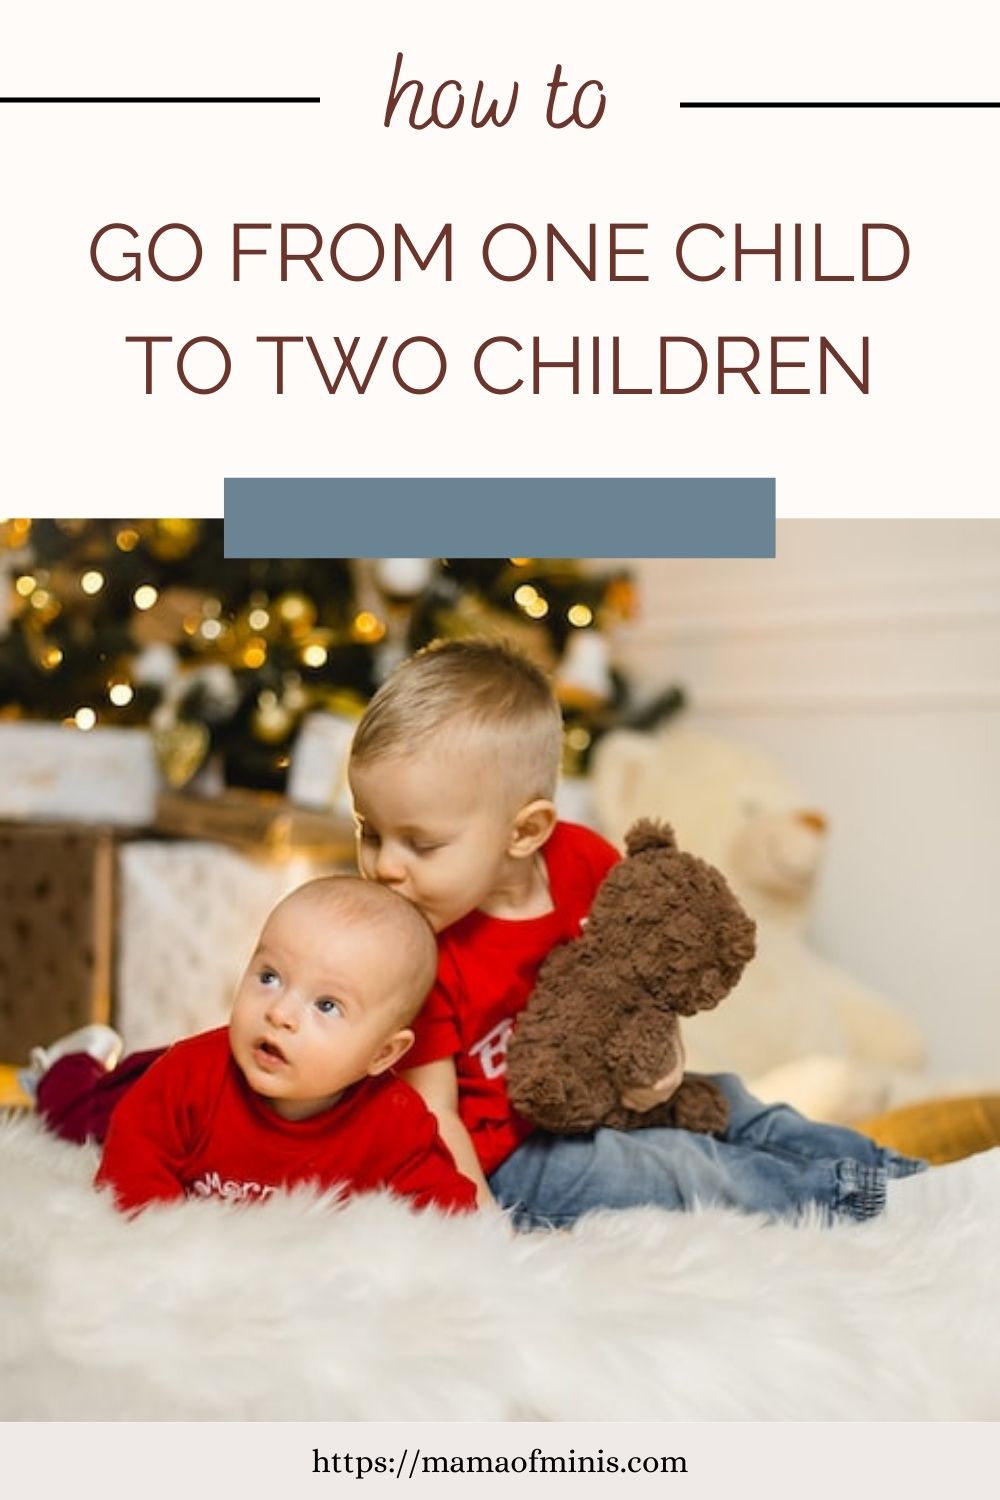 How to go from One Child to Two Children